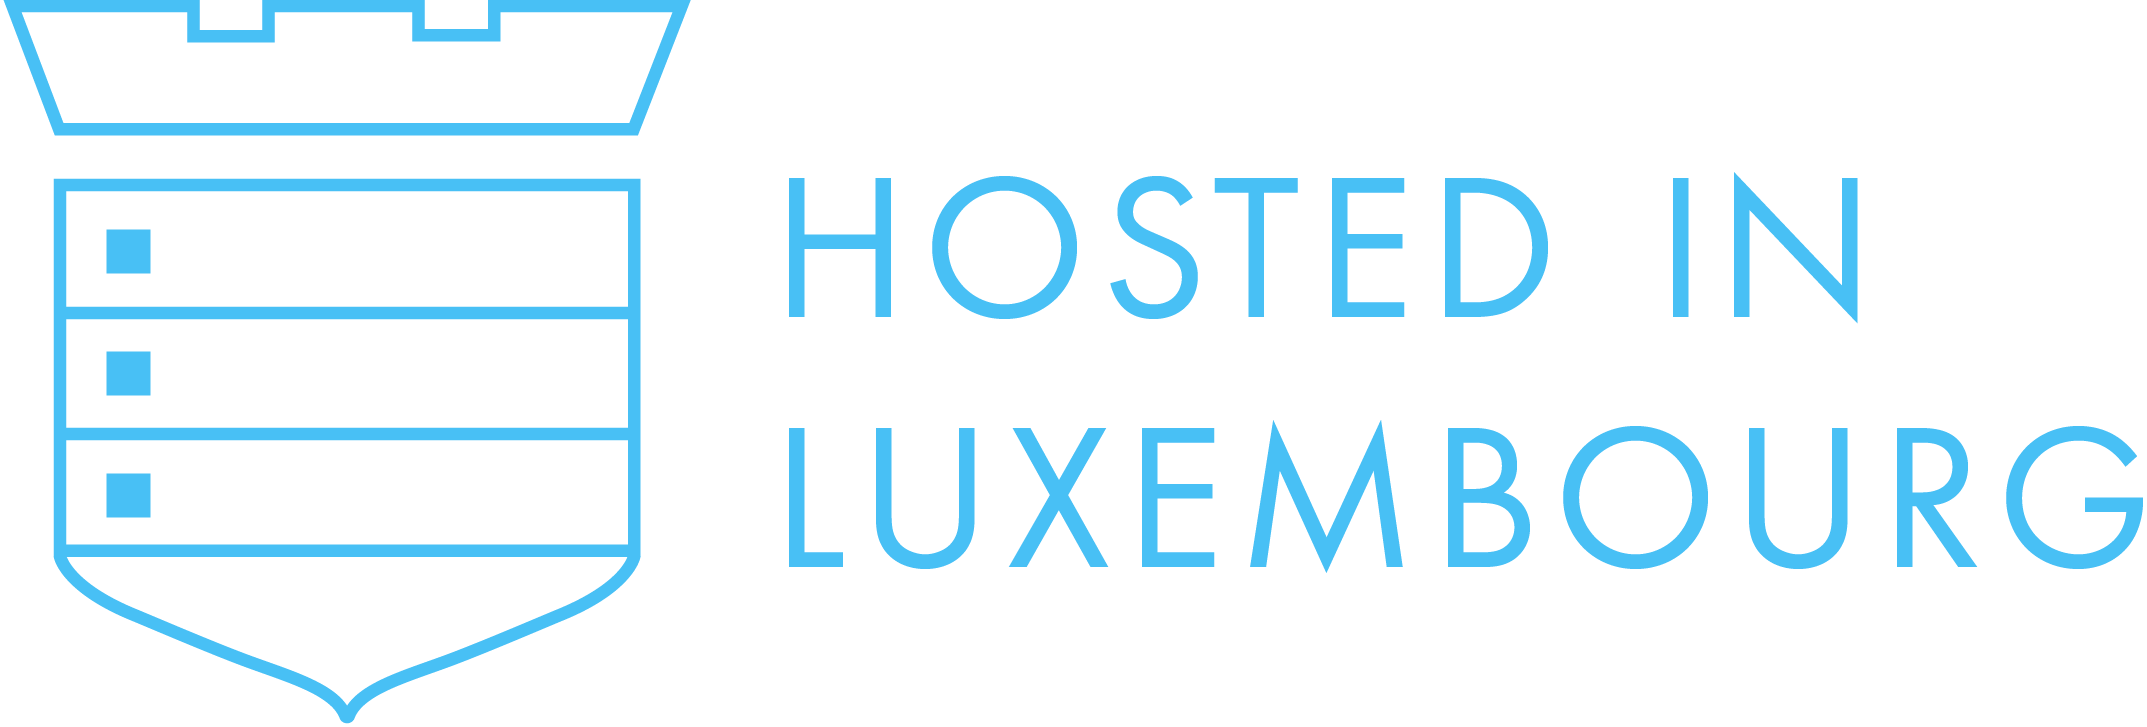 Hosted In Luxembourg